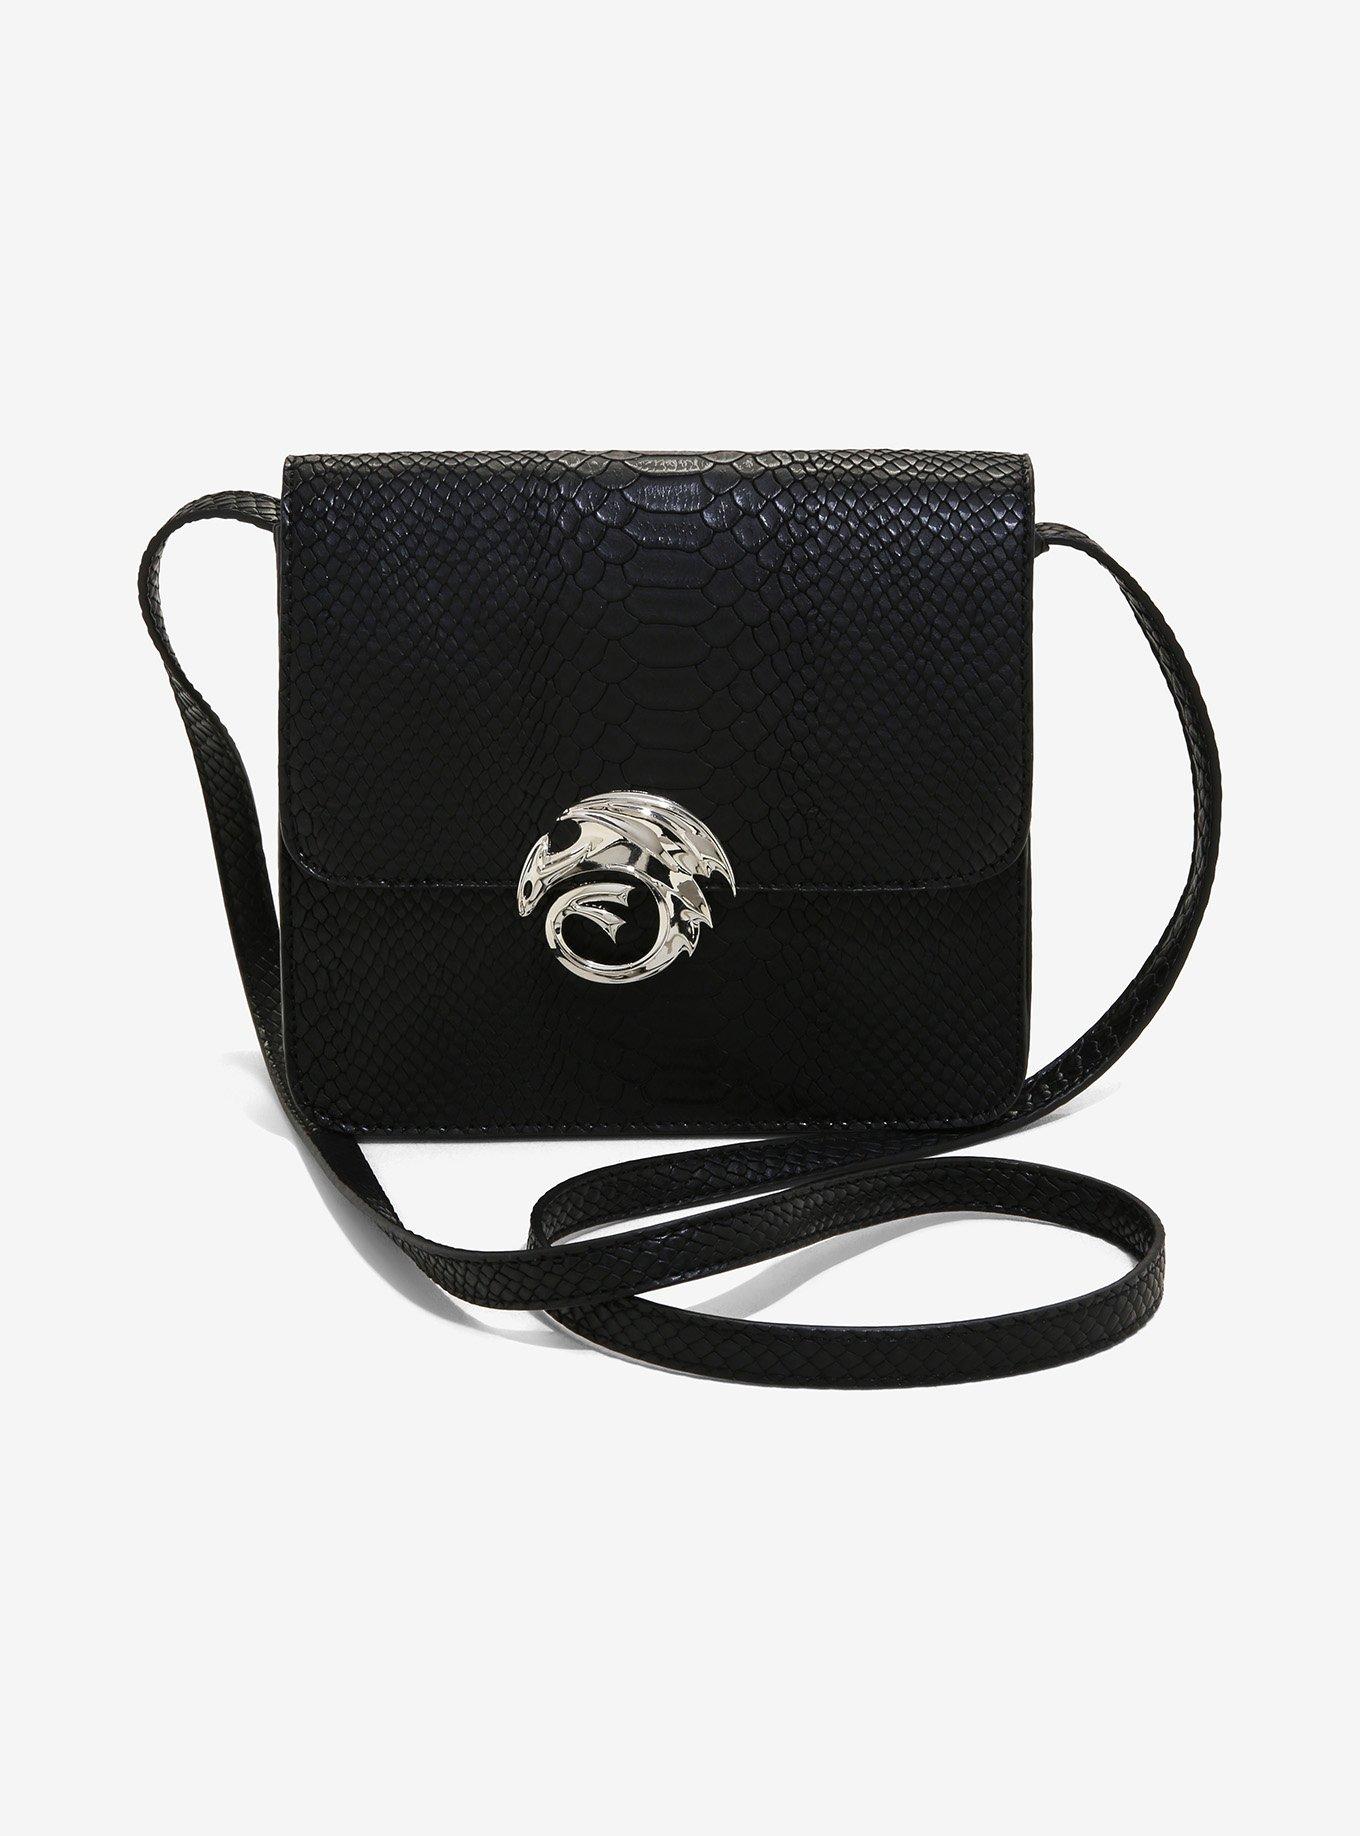 How To Train Your Dragon Toothless Mini Crossbody Bag, , hi-res